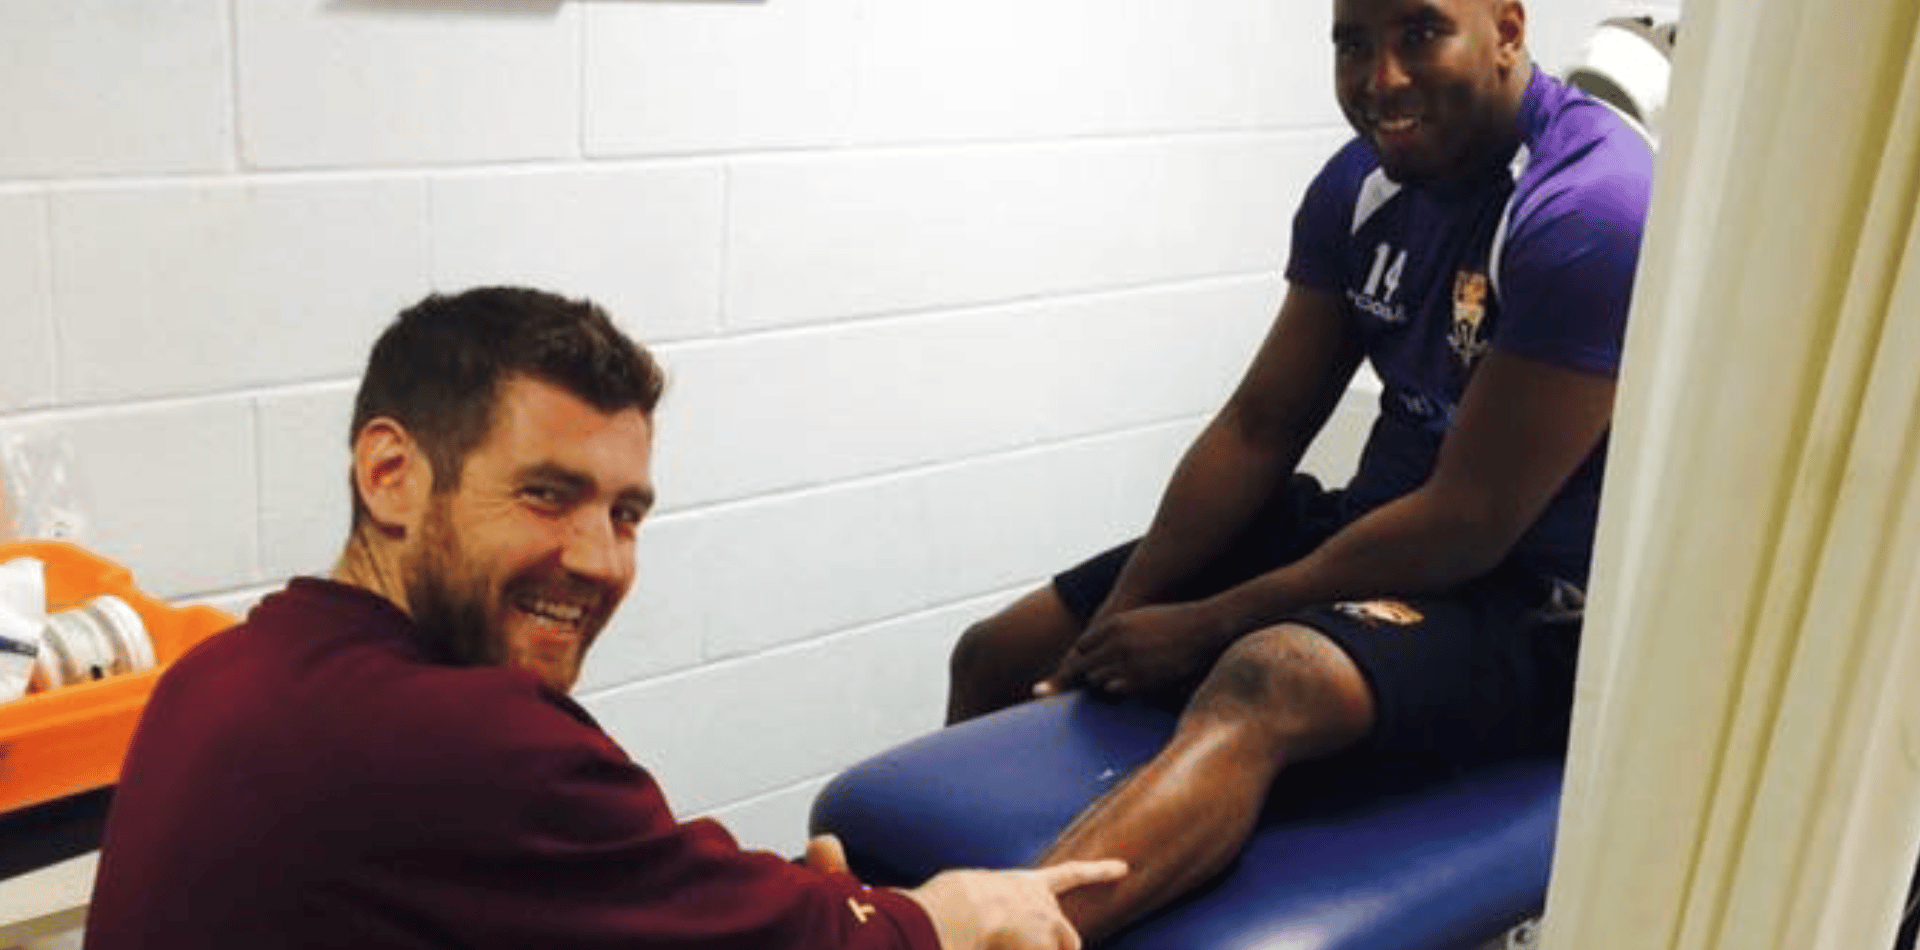 Dave O'Sullivan physiotherapist treating professional rugby player